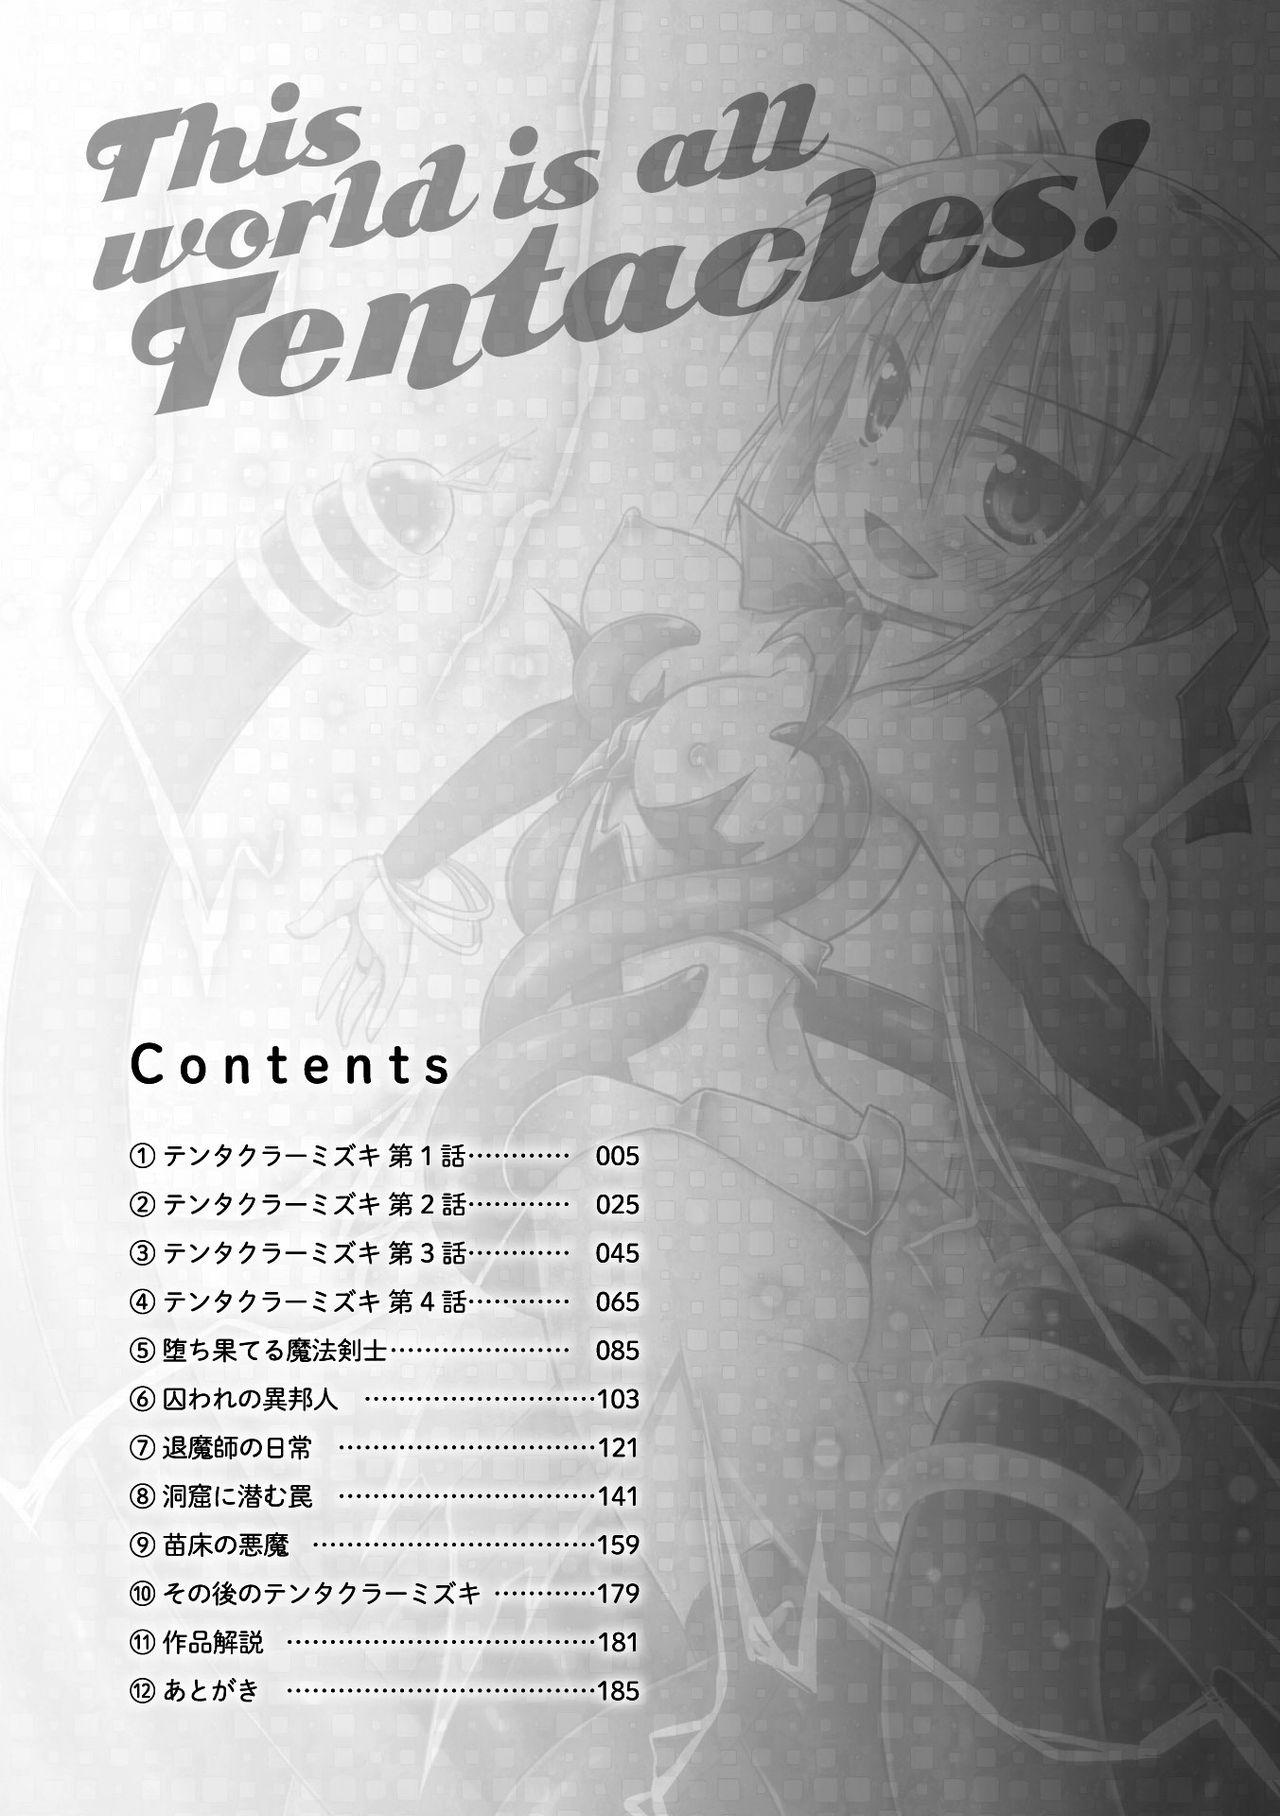 College This World is all Tentacles | Konoyo wa Subete Tentacle! From - Page 4